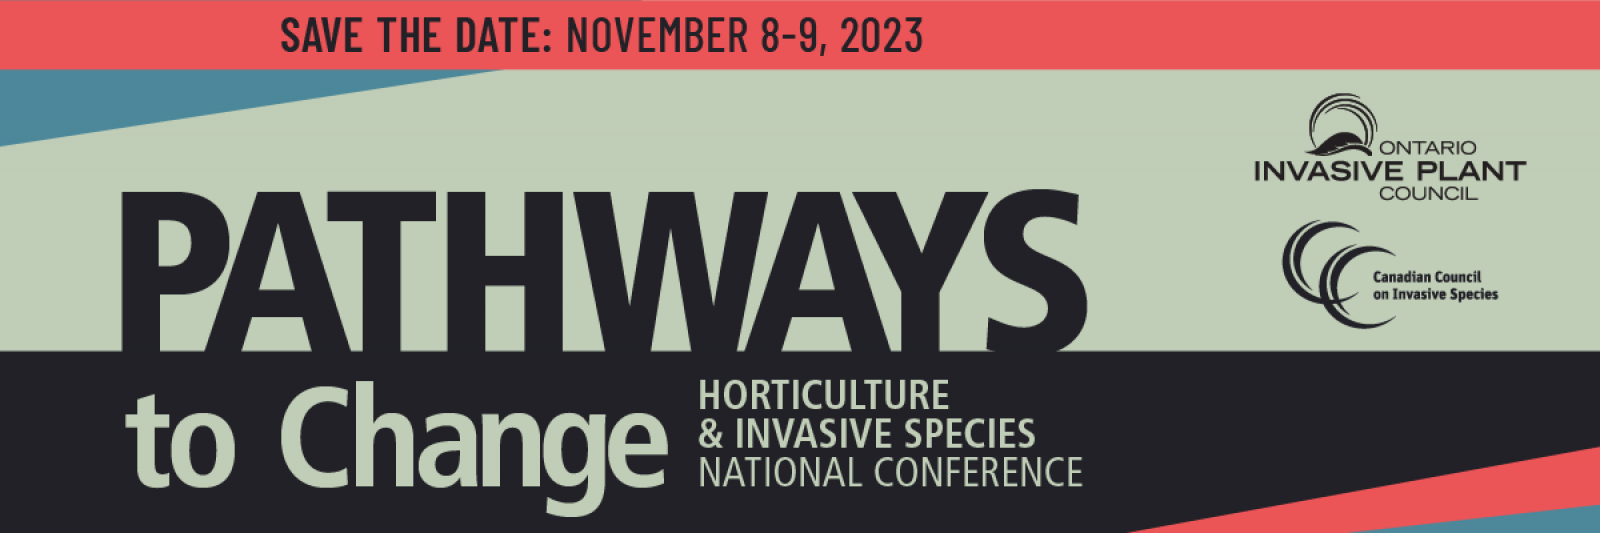 Pathways to Change — National Horticulture and Invasive Species Conference 2023